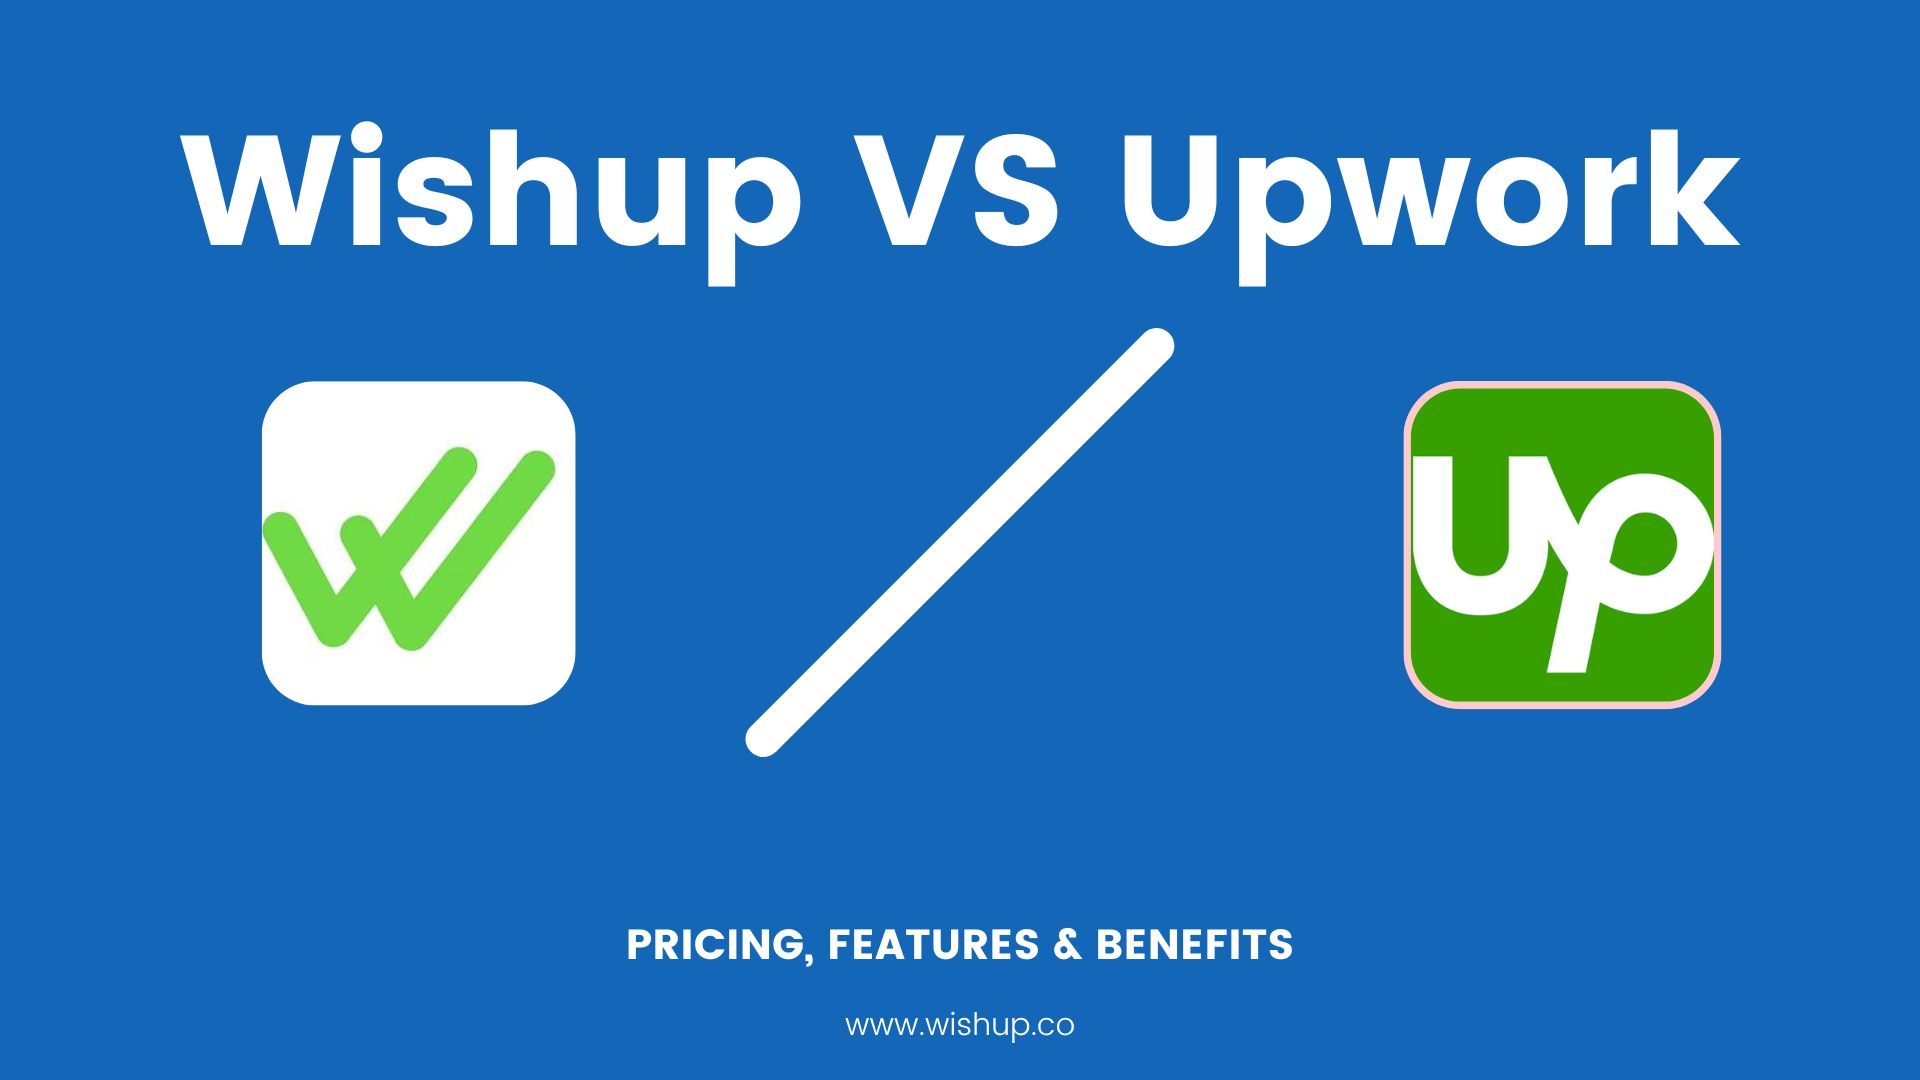 Why Wishup is Better than Upwork?